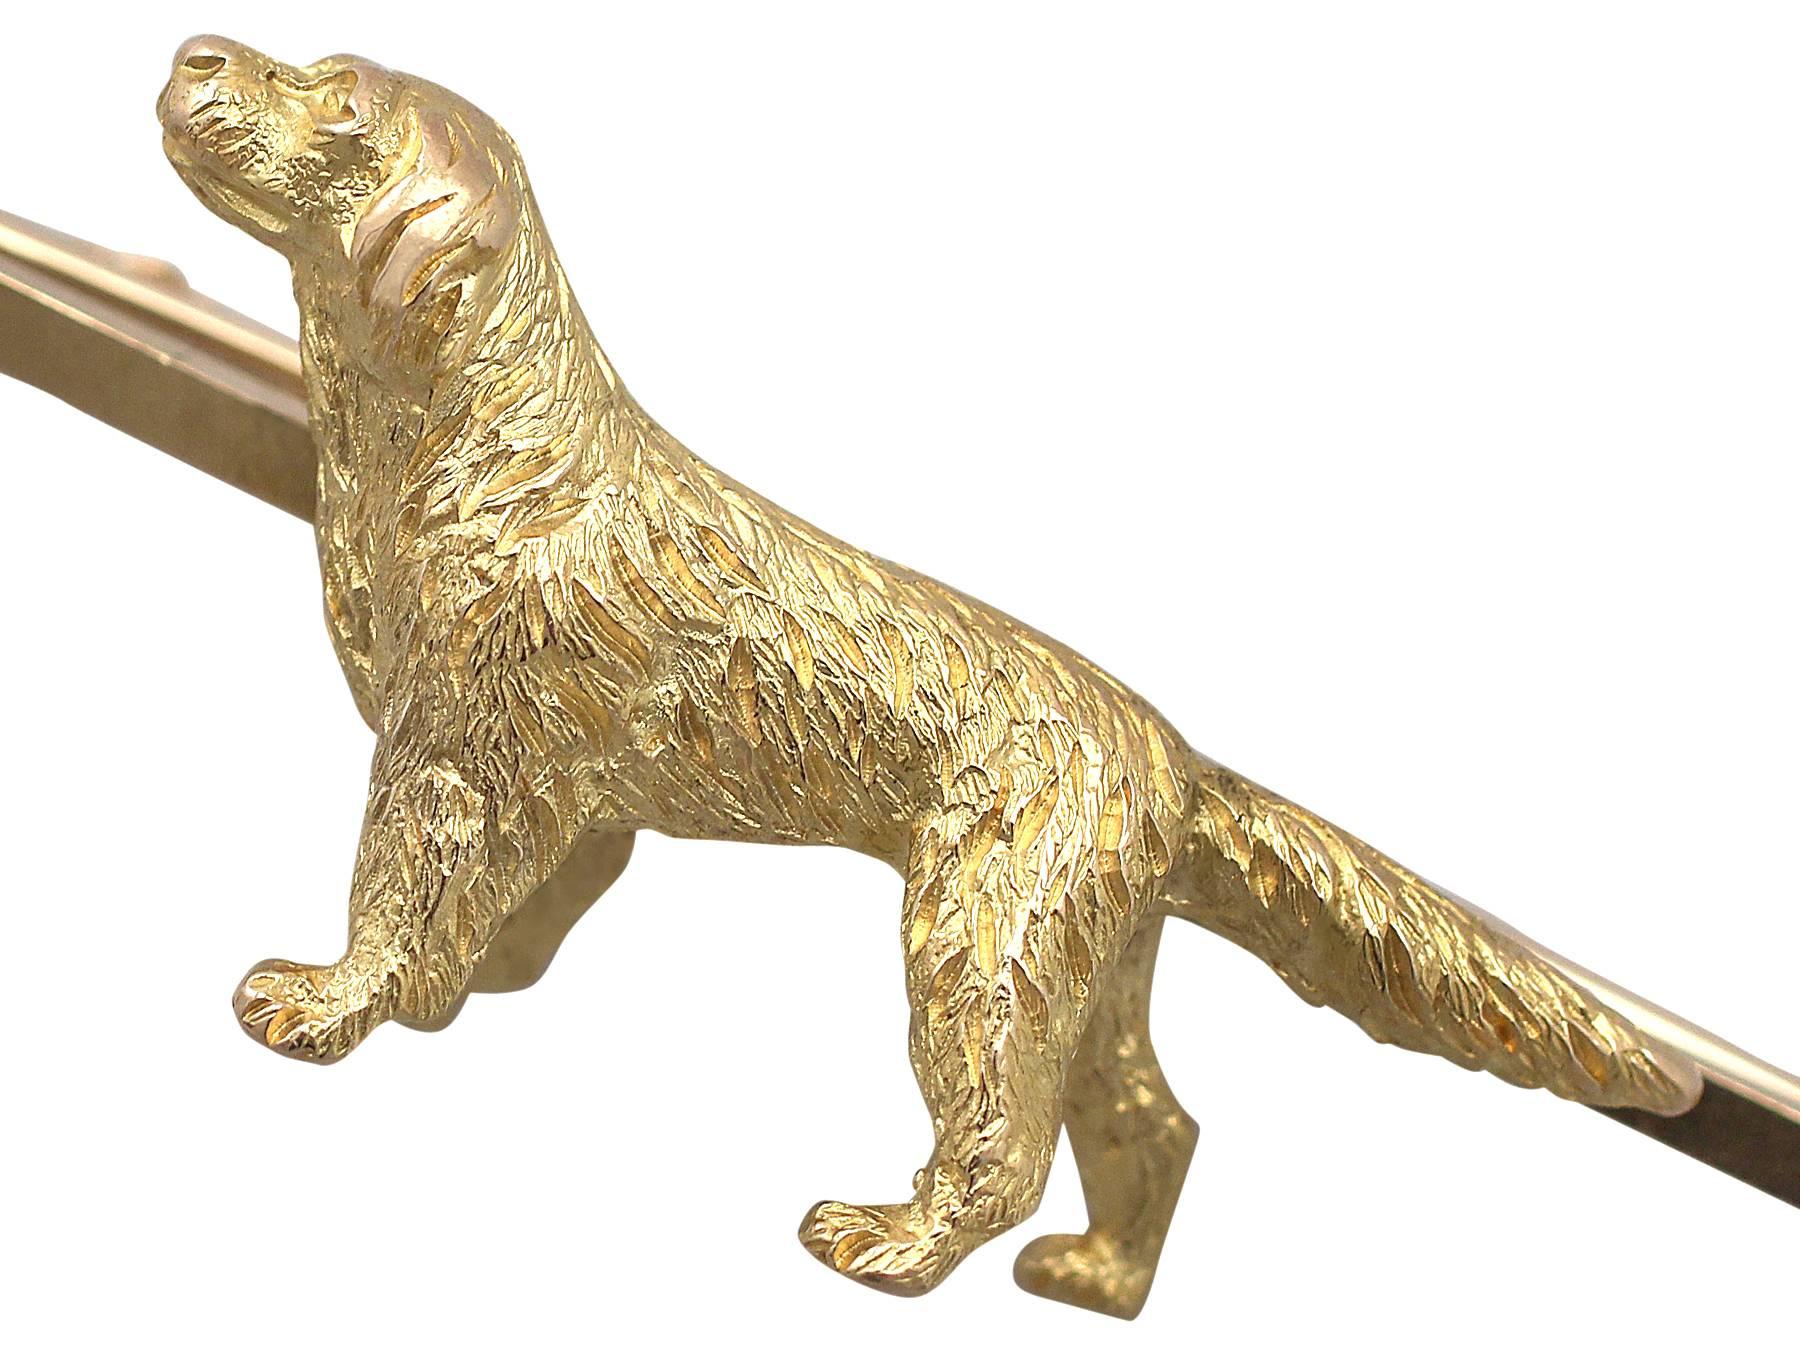 An exceptional, fine and impressive antique Victorian 15 carat yellow gold dog brooch in the form of a retriever; part of our antique jewelry and estate jewelry collections

This exceptional, fine and impressive dog brooch has been crafted in 15k